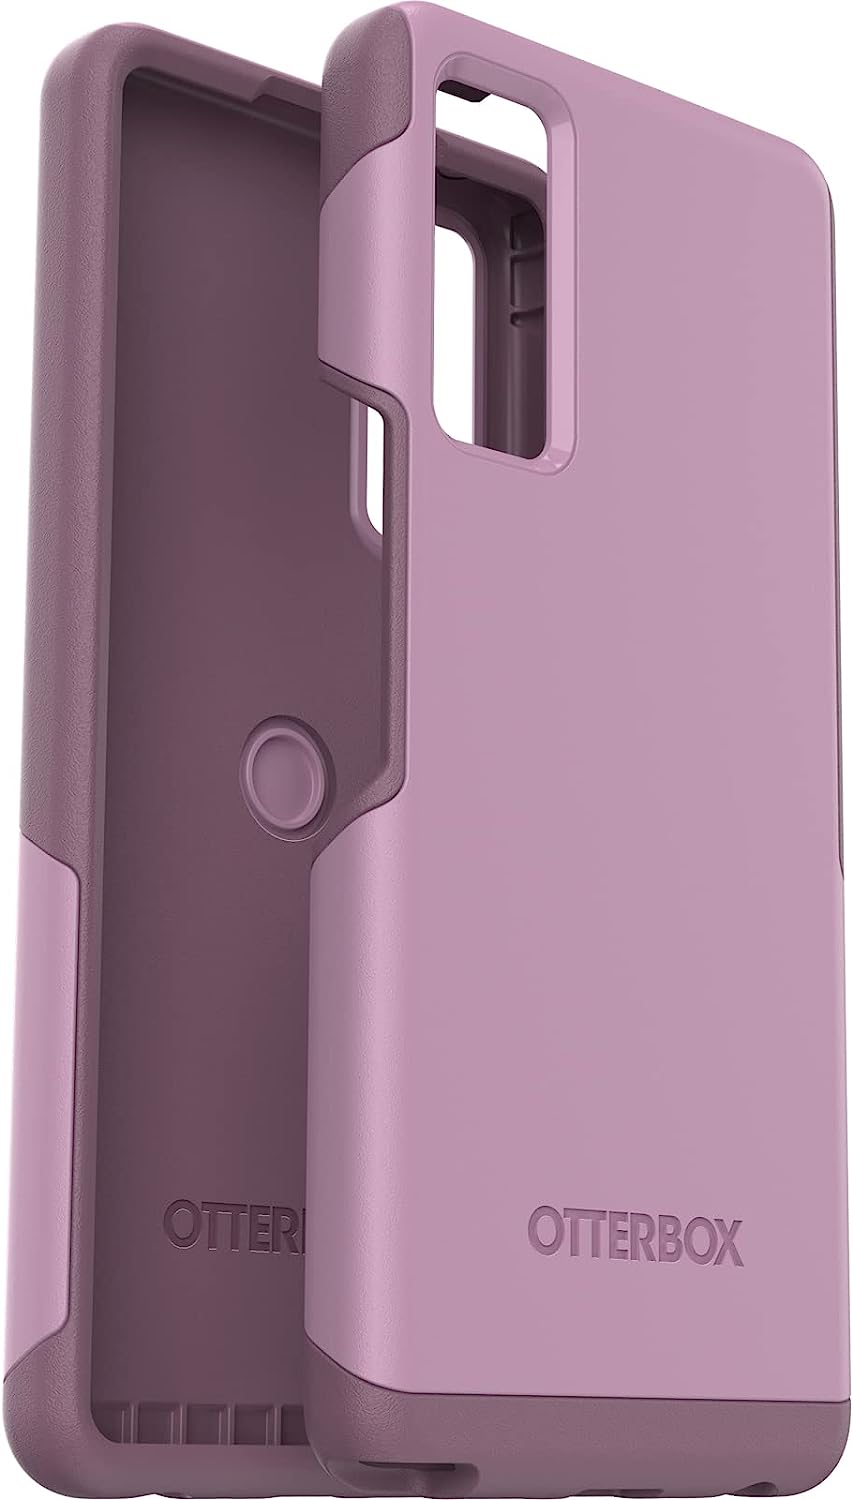 OtterBox COMMUTER LITE Case for TCL Stylus 5G - Maven Way (New)